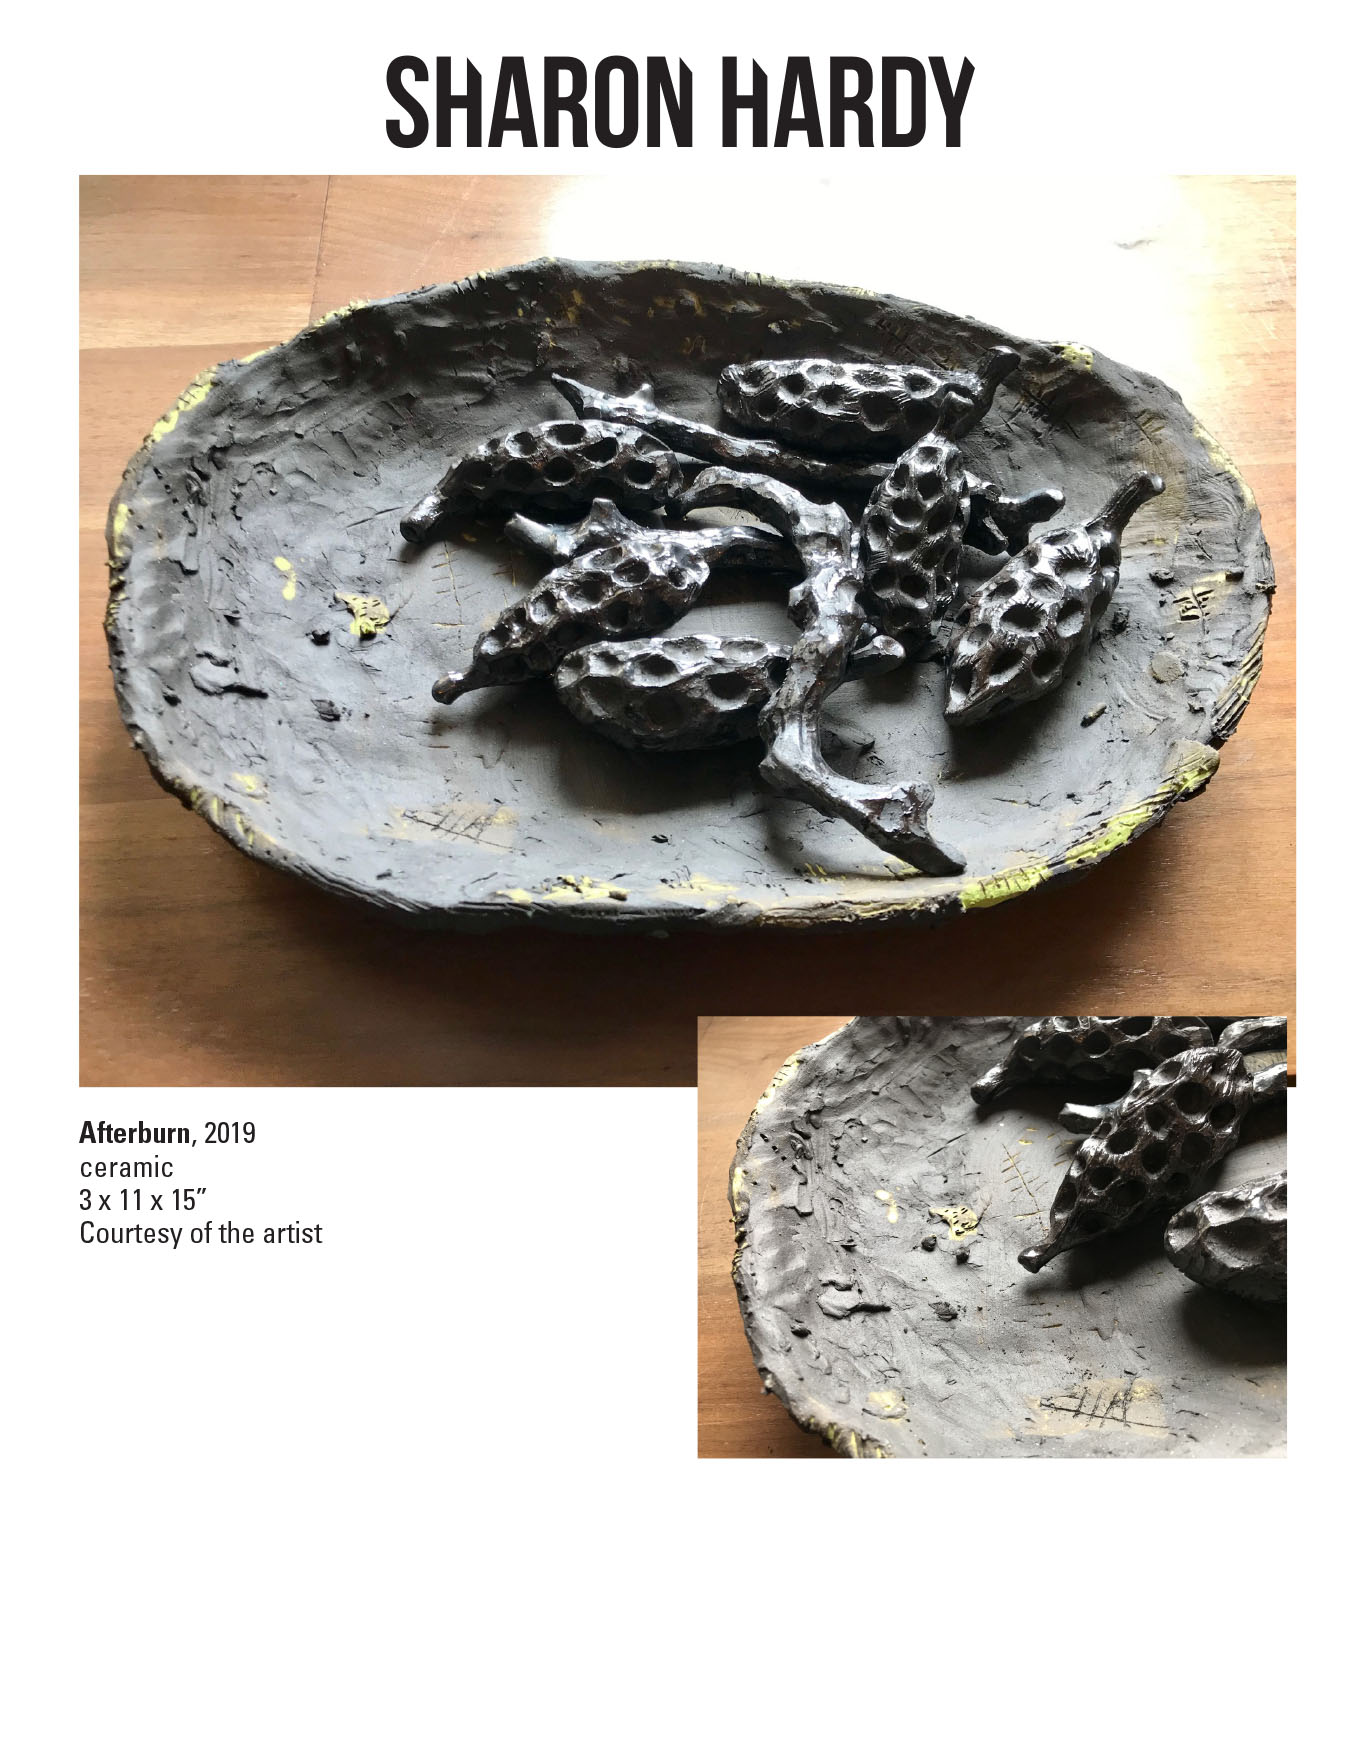 Sharon Hardy, Afterburn, 2019. Ceramic. 3 x 11 x 15” Courtesy of the artist. A sculpture of a plate with seed pods